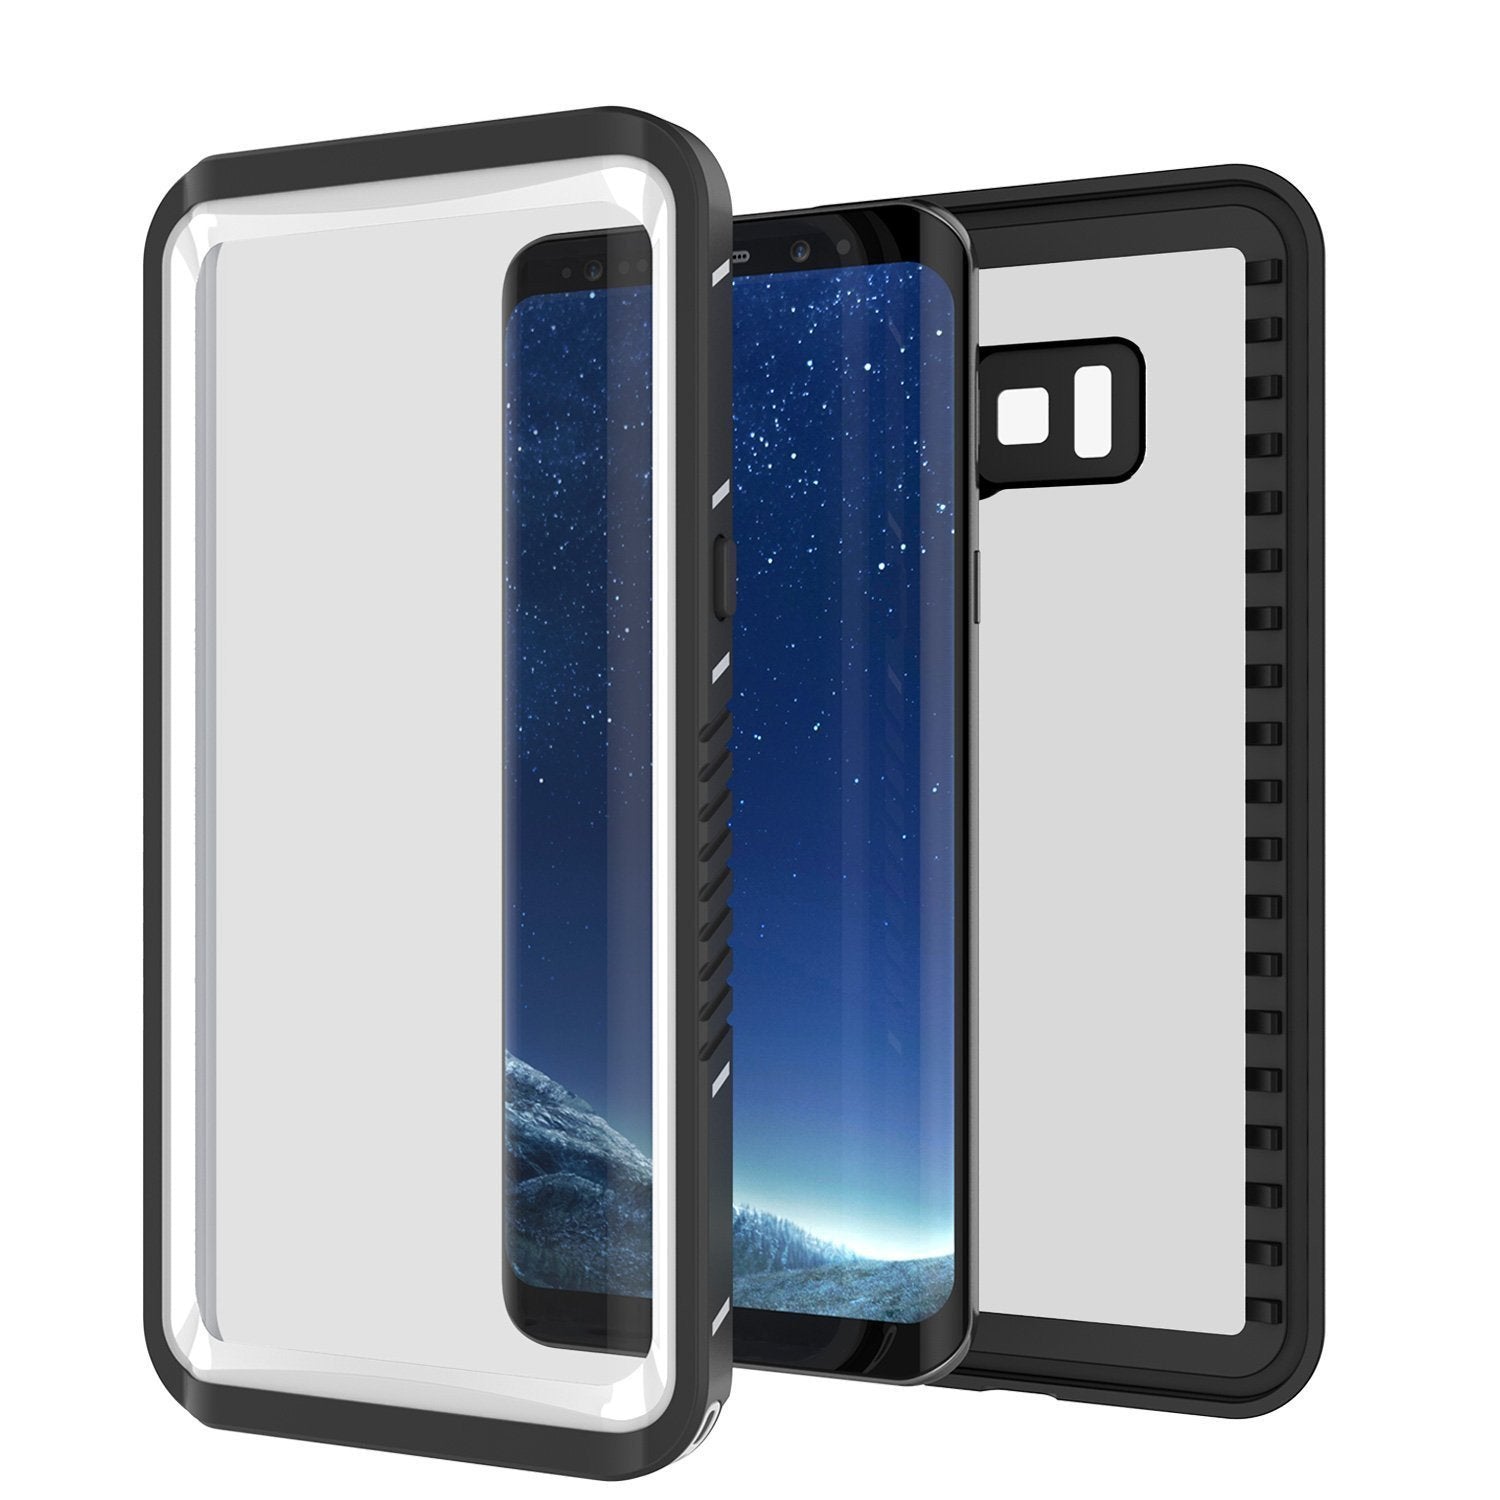 Galaxy S8 Punkcase [Extreme Series] Slim Fit Armor Cover [Black]